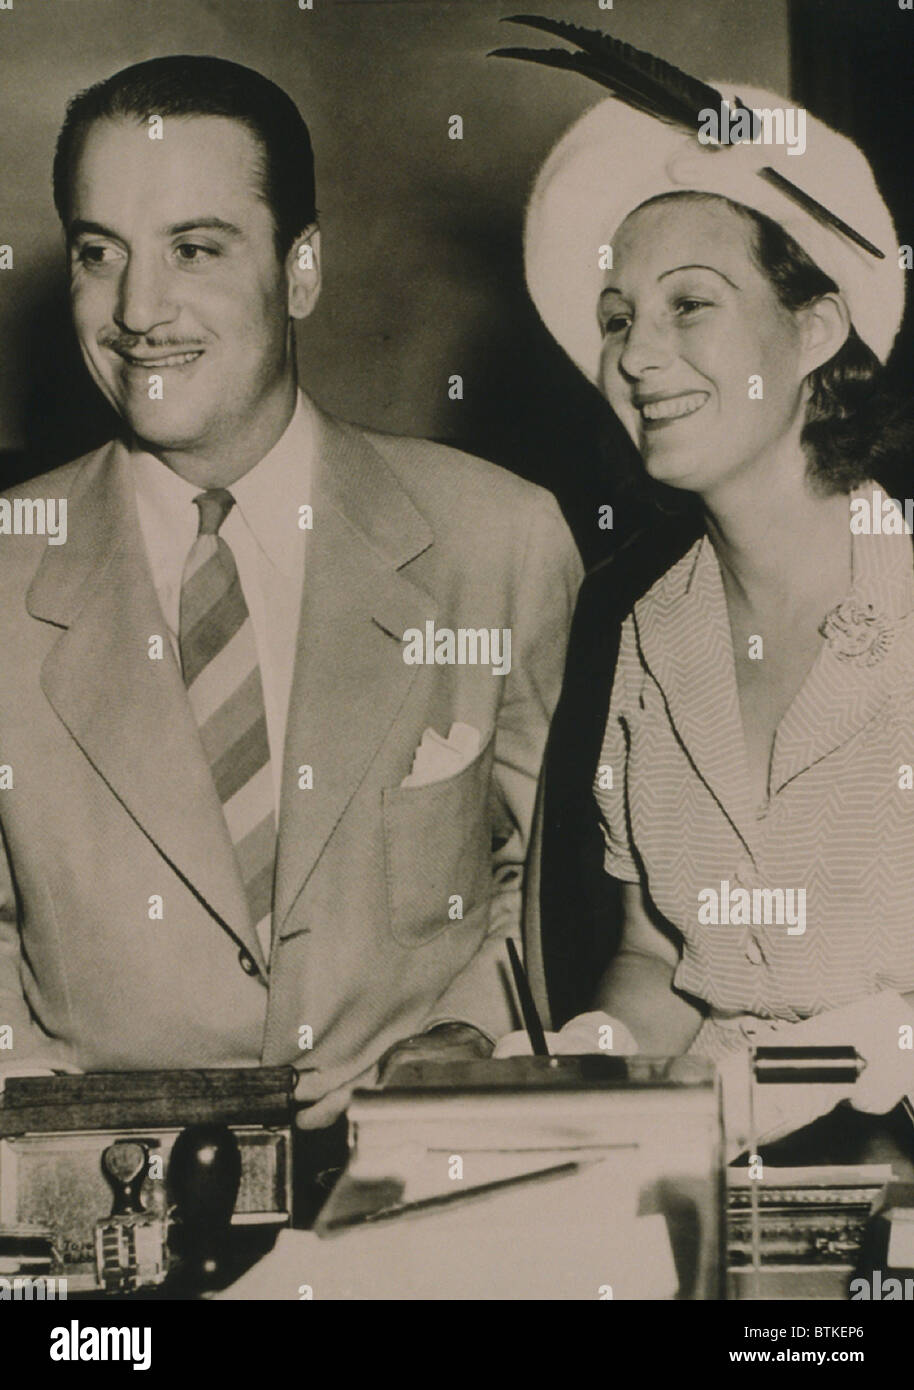 Hollywood producer, Mike Frankovich (1910-1992) and bride to be, English actress Binnie Barnes (1903-1996) in 1940. Both had long film careers extending into the 1960s. Stock Photo